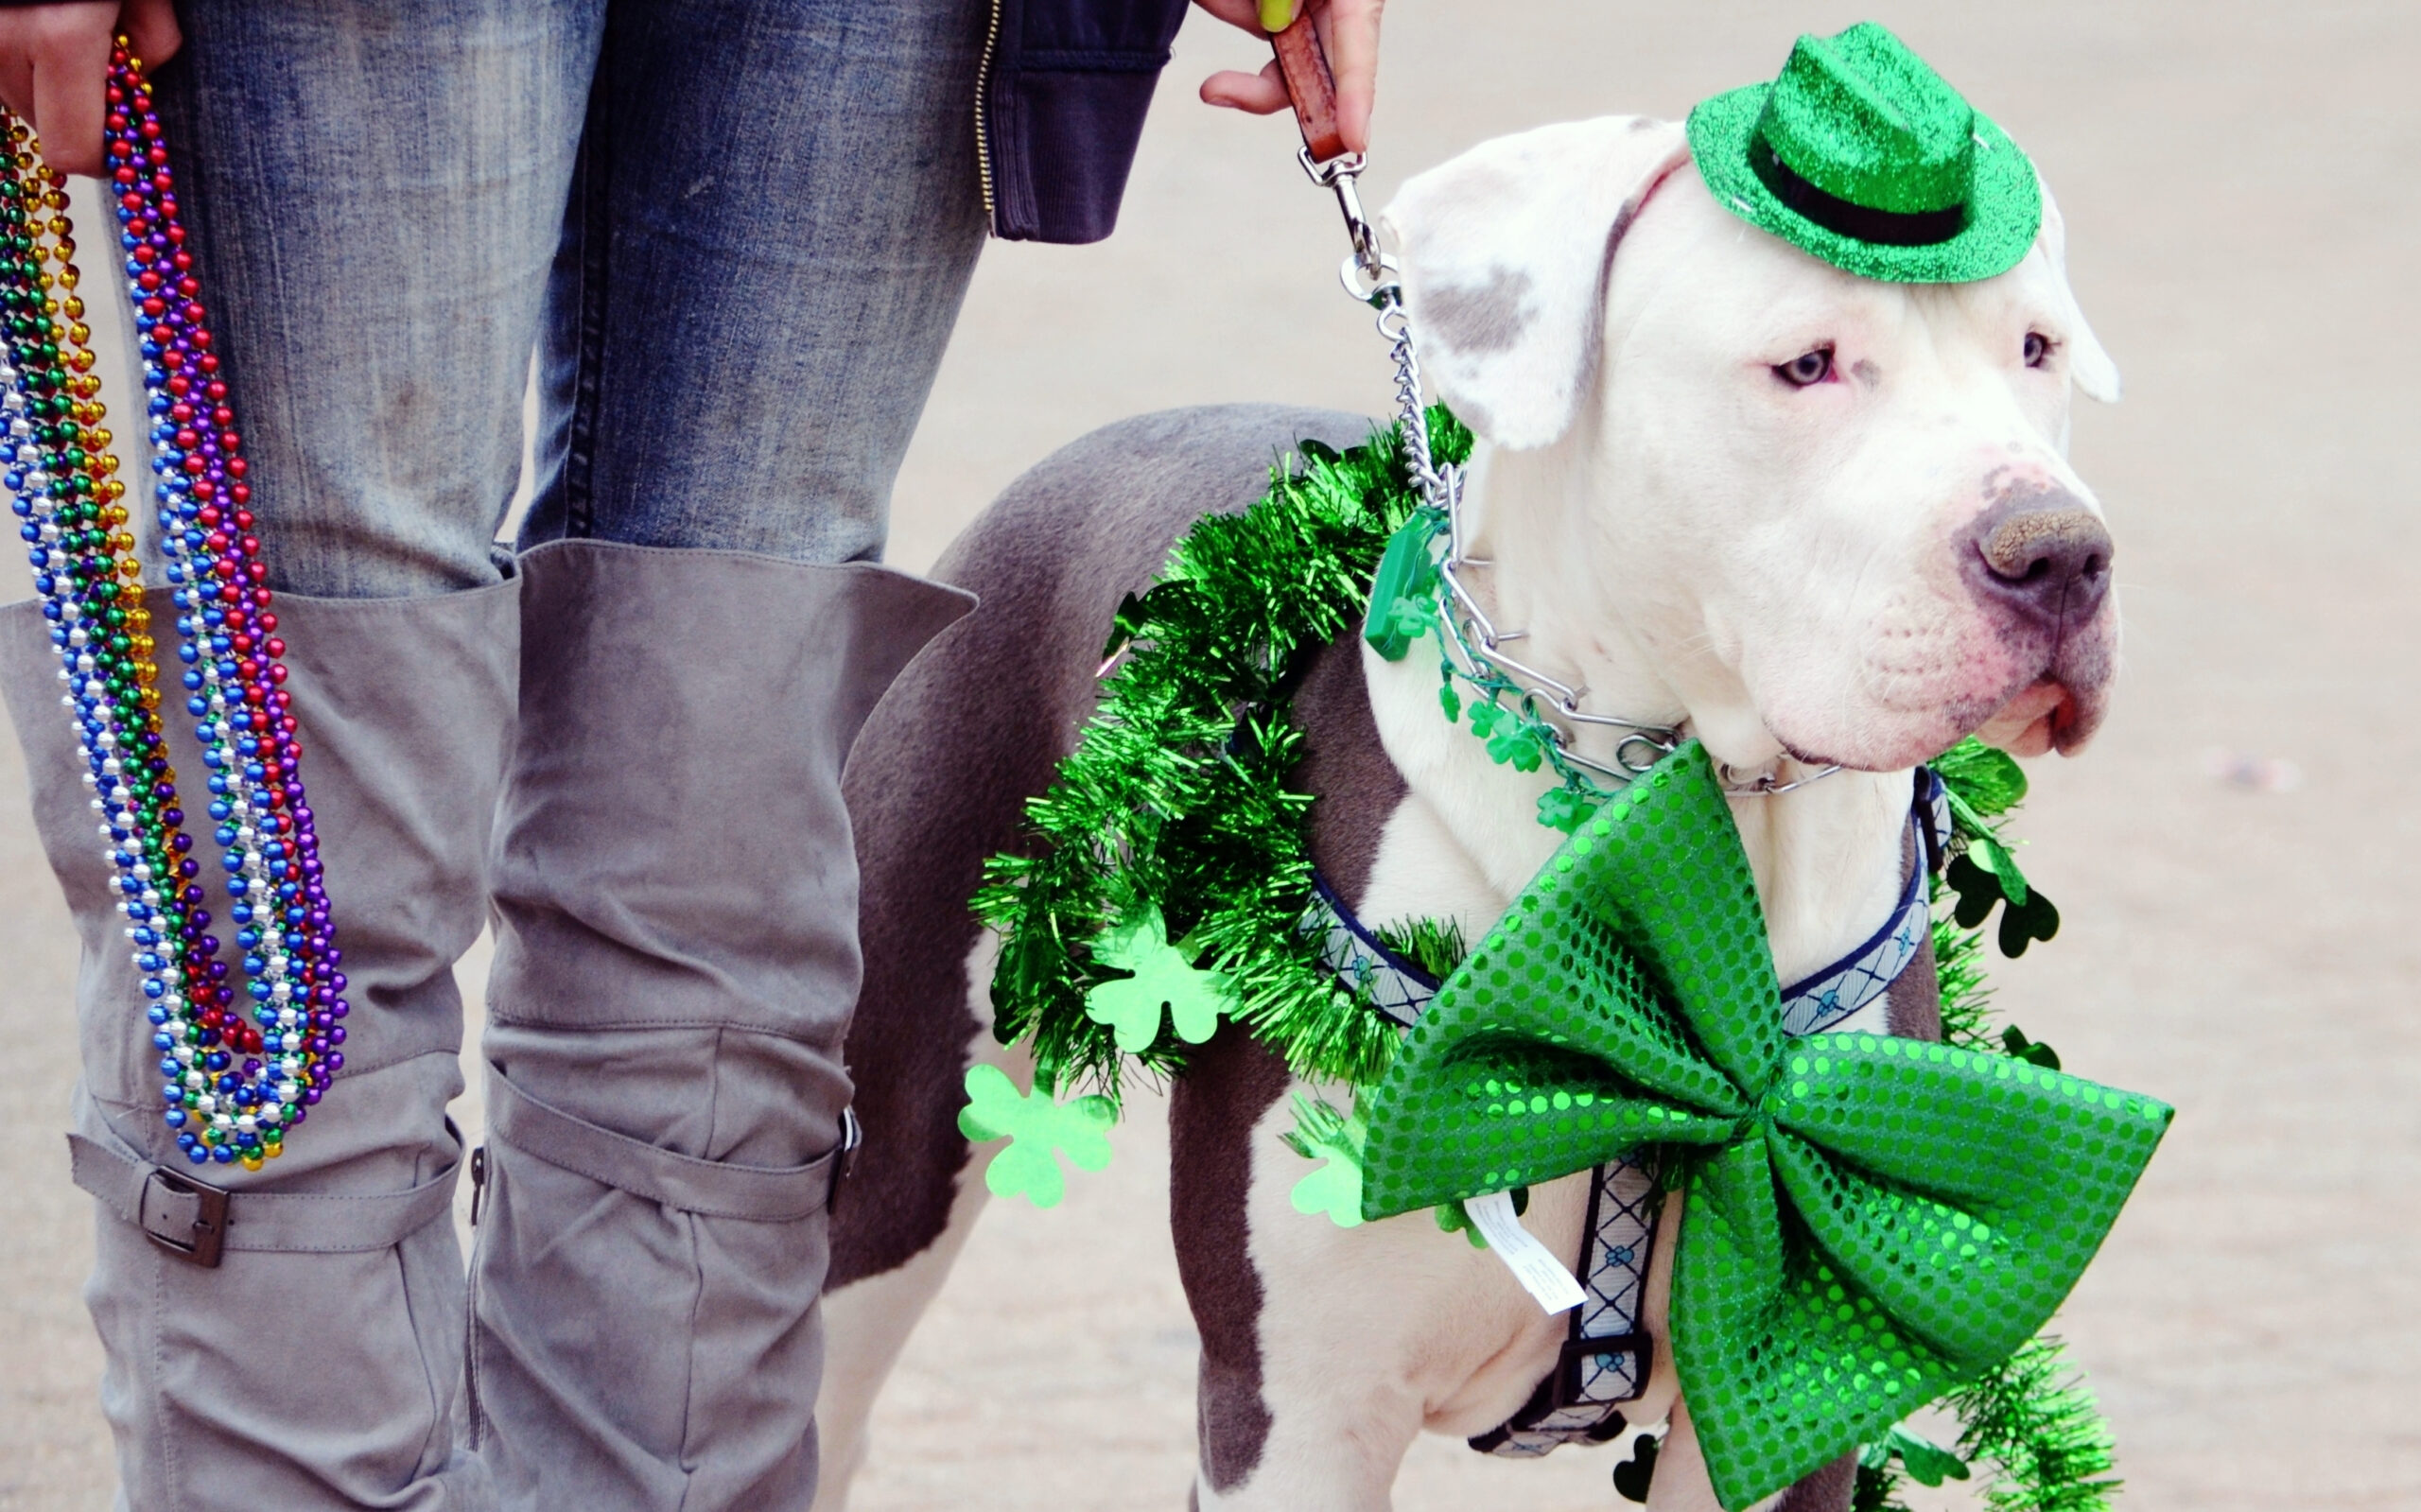 Dog dressed up for St. Patrick's Day parade